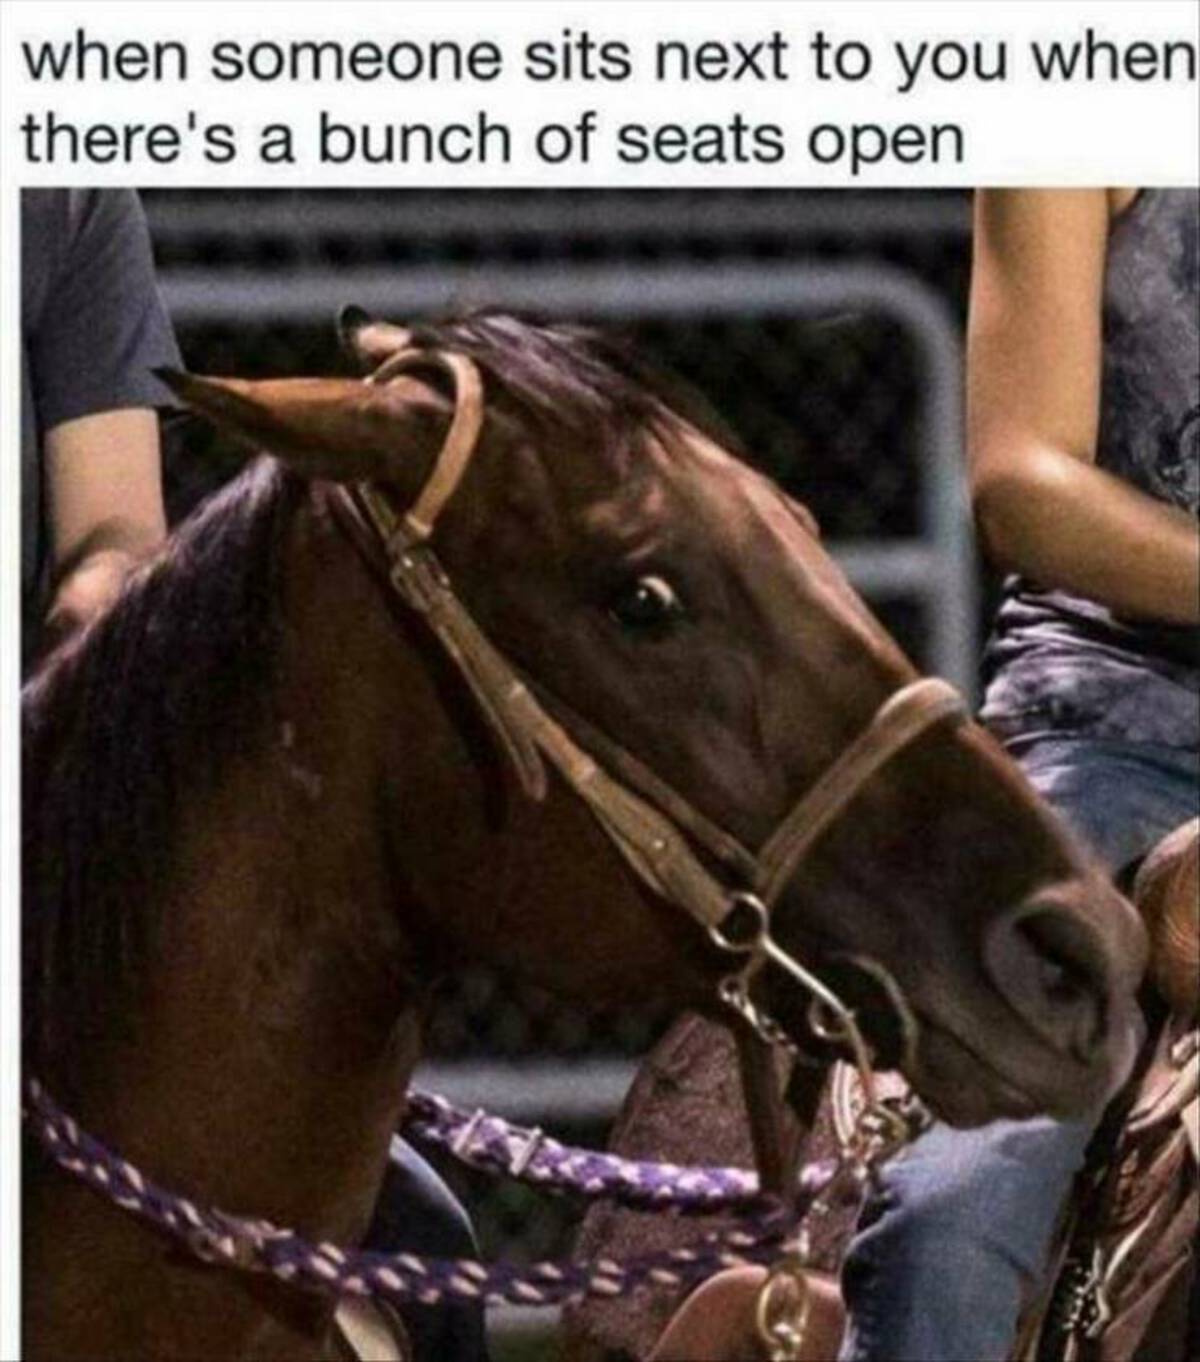 bridle - when someone sits next to you when there's a bunch of seats open